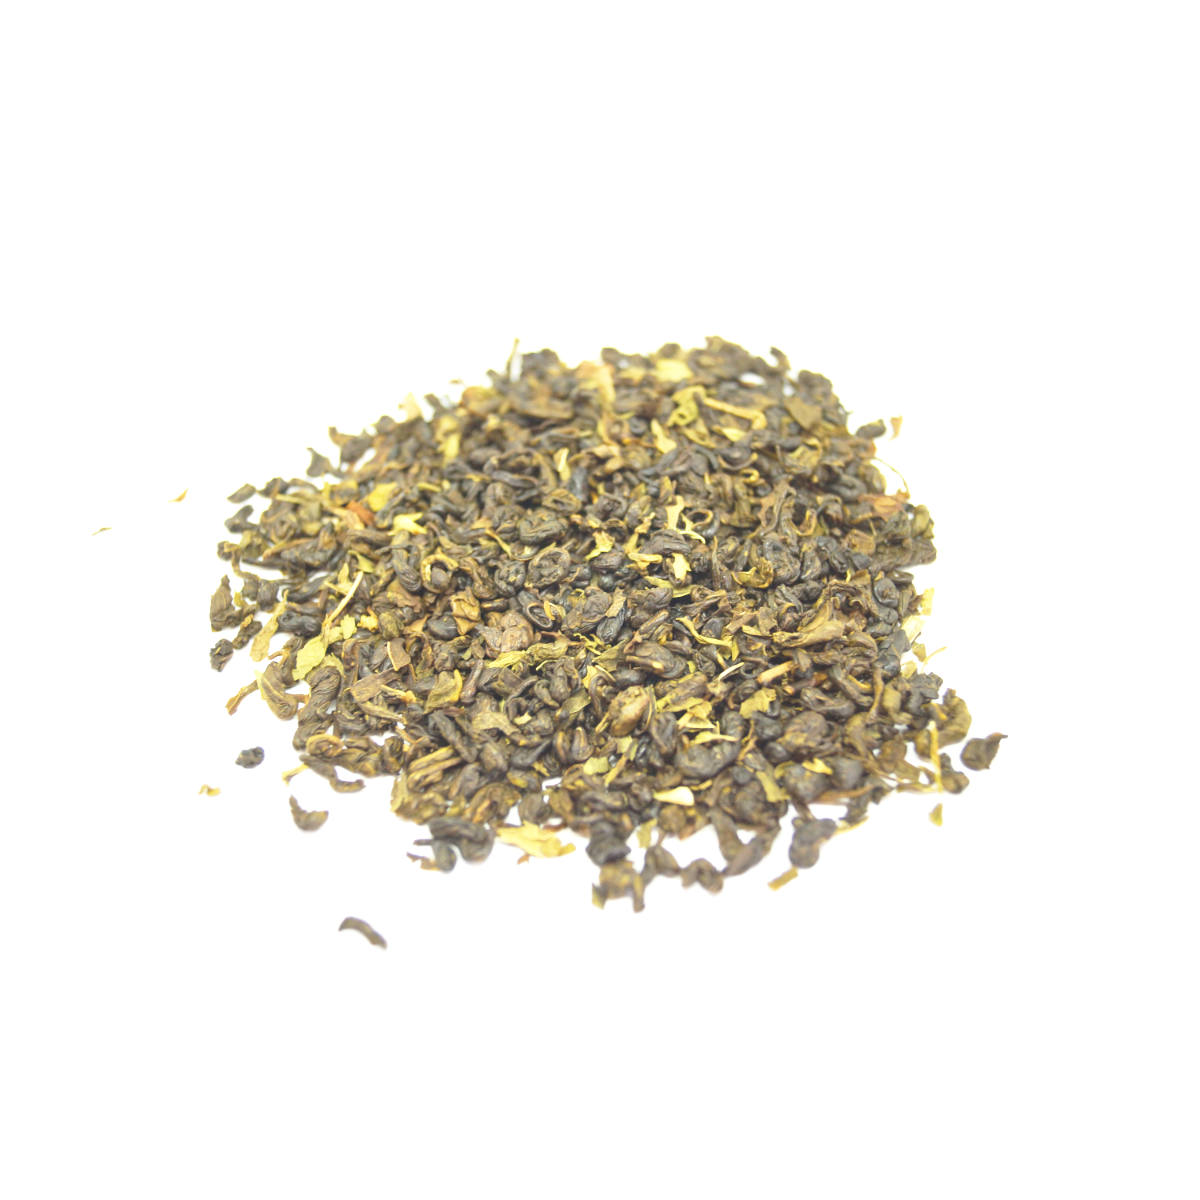 Moroccan Mint A beautiful tight rolled gunpowder green tea with organic spearmint leaves....wonderful with chocolate milk.